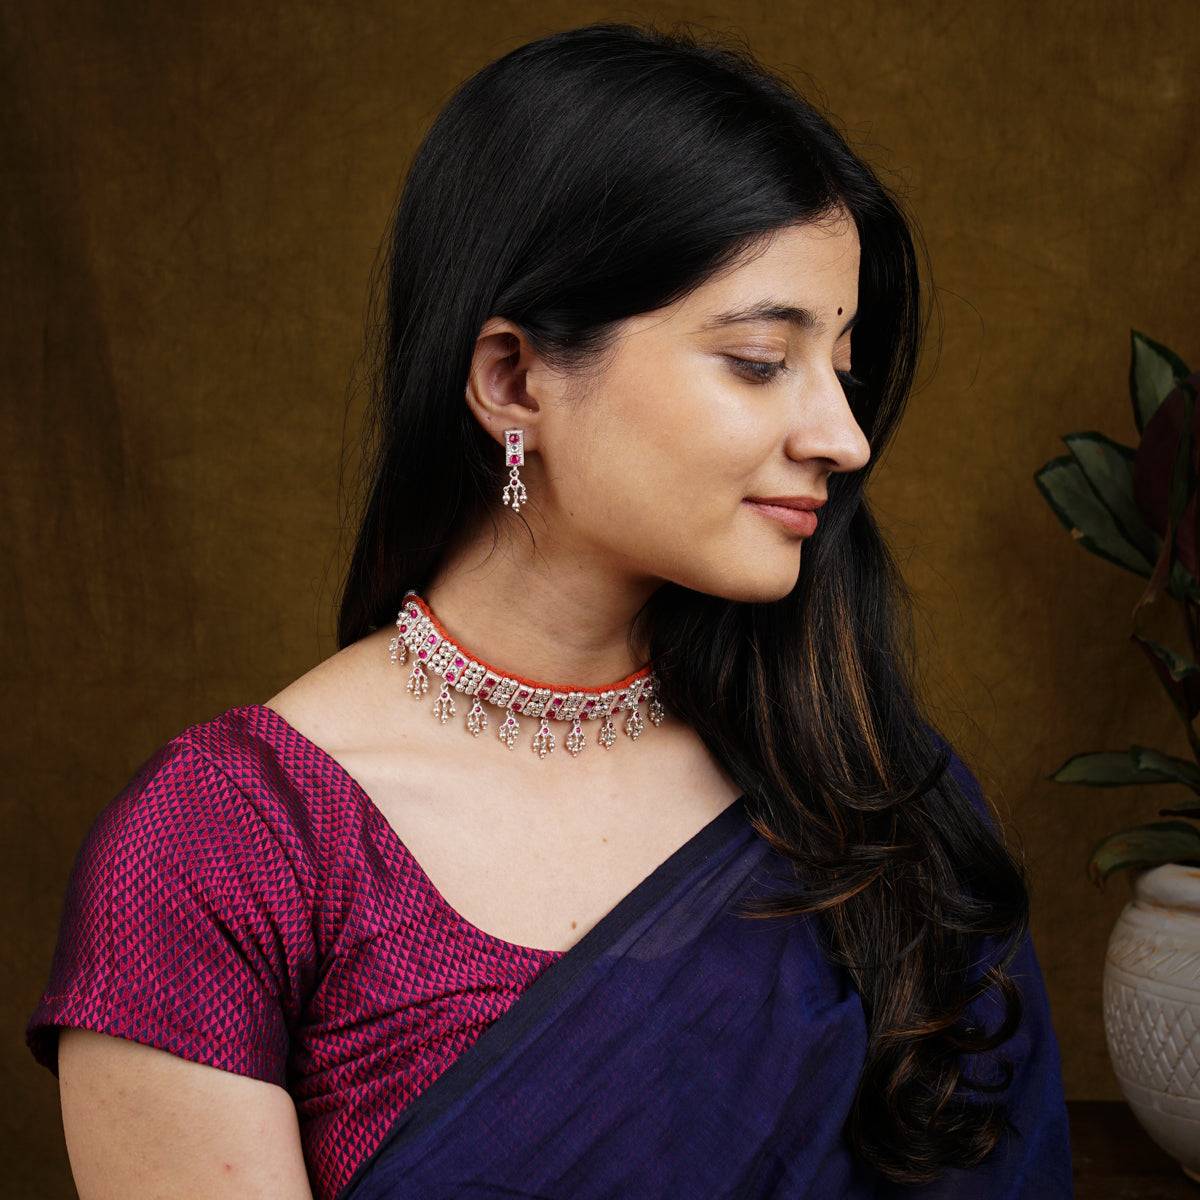 a woman wearing a purple saree and a necklace